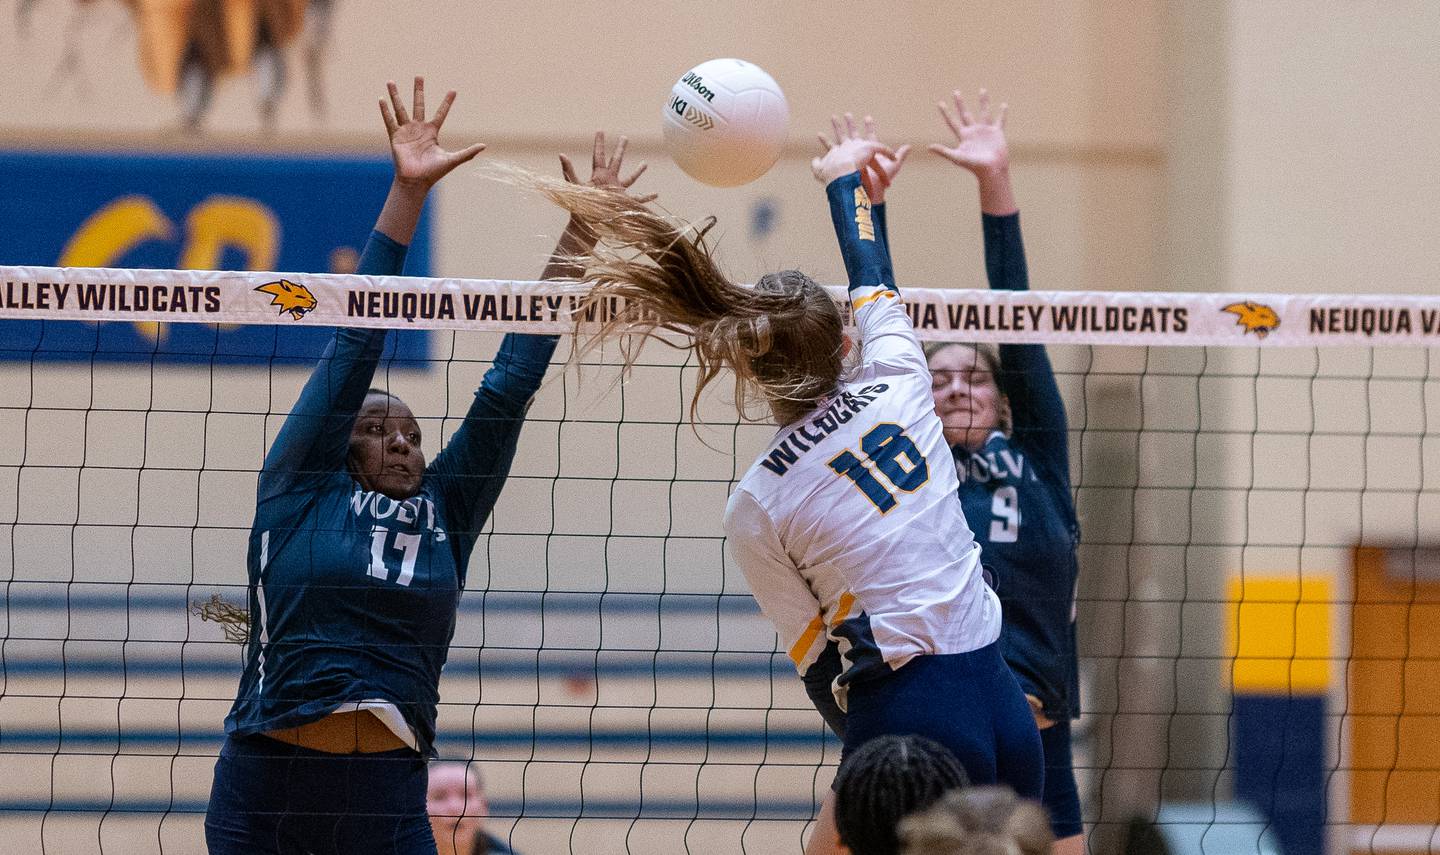 Oswego East's Vivian Campbell (17) and Oswego East's Kylie Kany (9) defend the net against a kill attempt by Neuqua Valley's Eleanor O'Neal (16) during the Neuqua Valley 4A regional final volleyball match at Neuqua Valley High School in Naperville on Thursday, Oct 27, 2022.